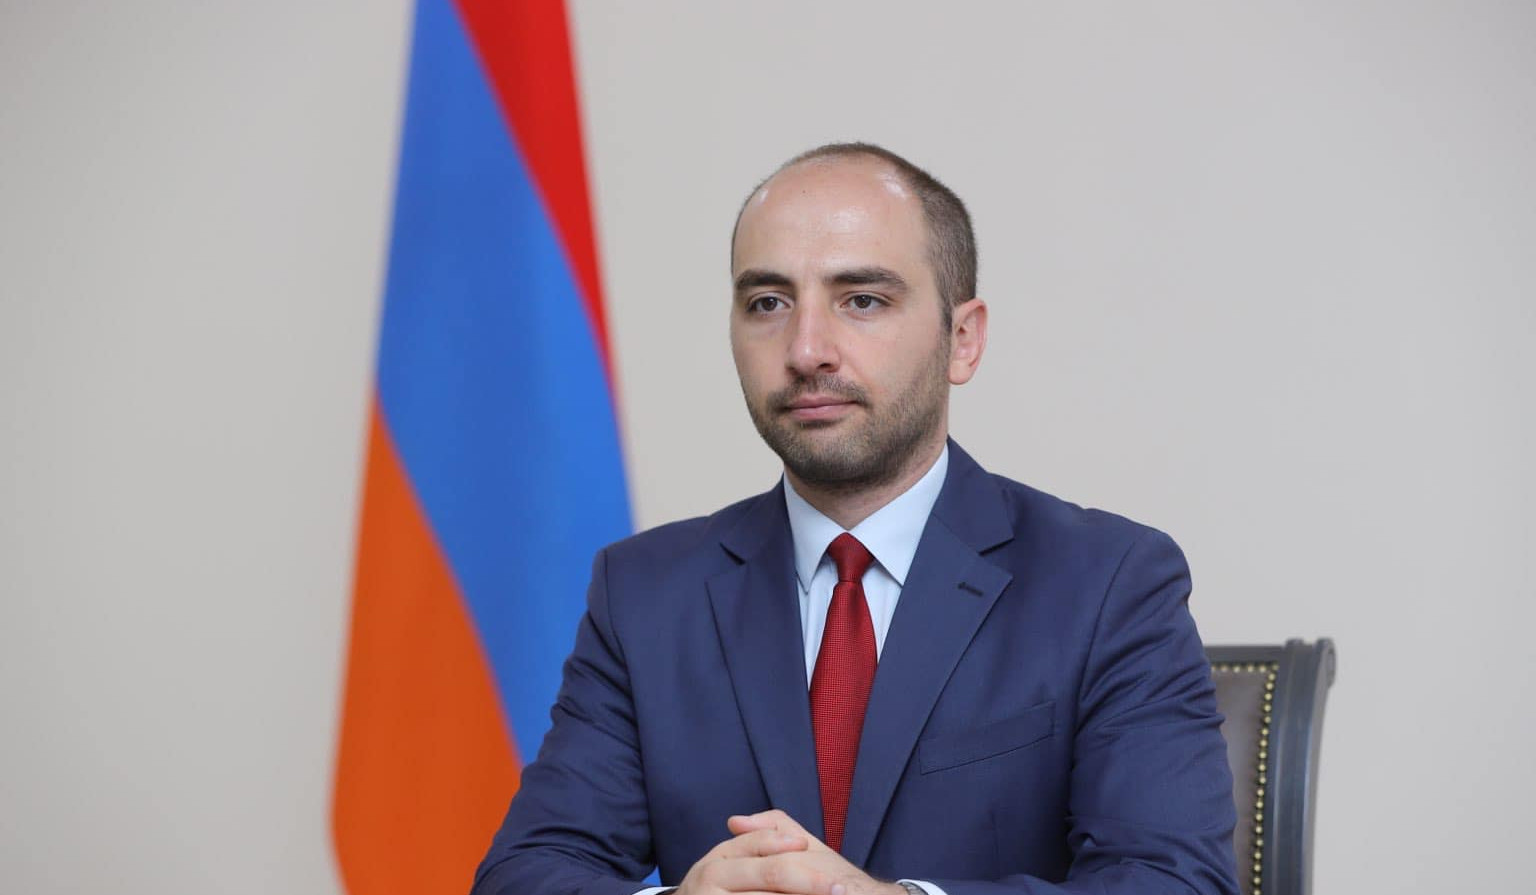 At the moment, there is no agreement regarding meeting of special envoys of Armenia and Turkey: Vahan Hunanyan